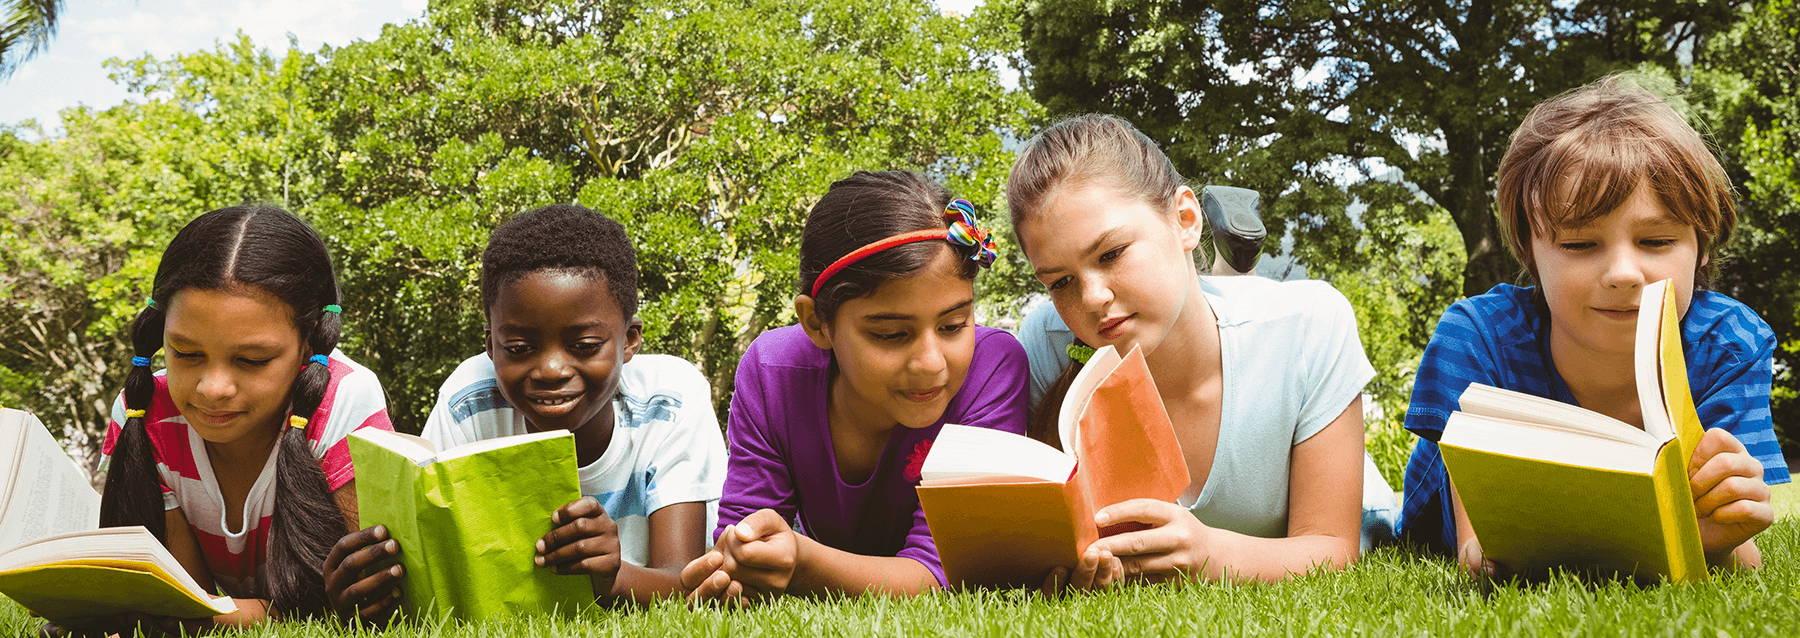 summer reading activities for 5th graders